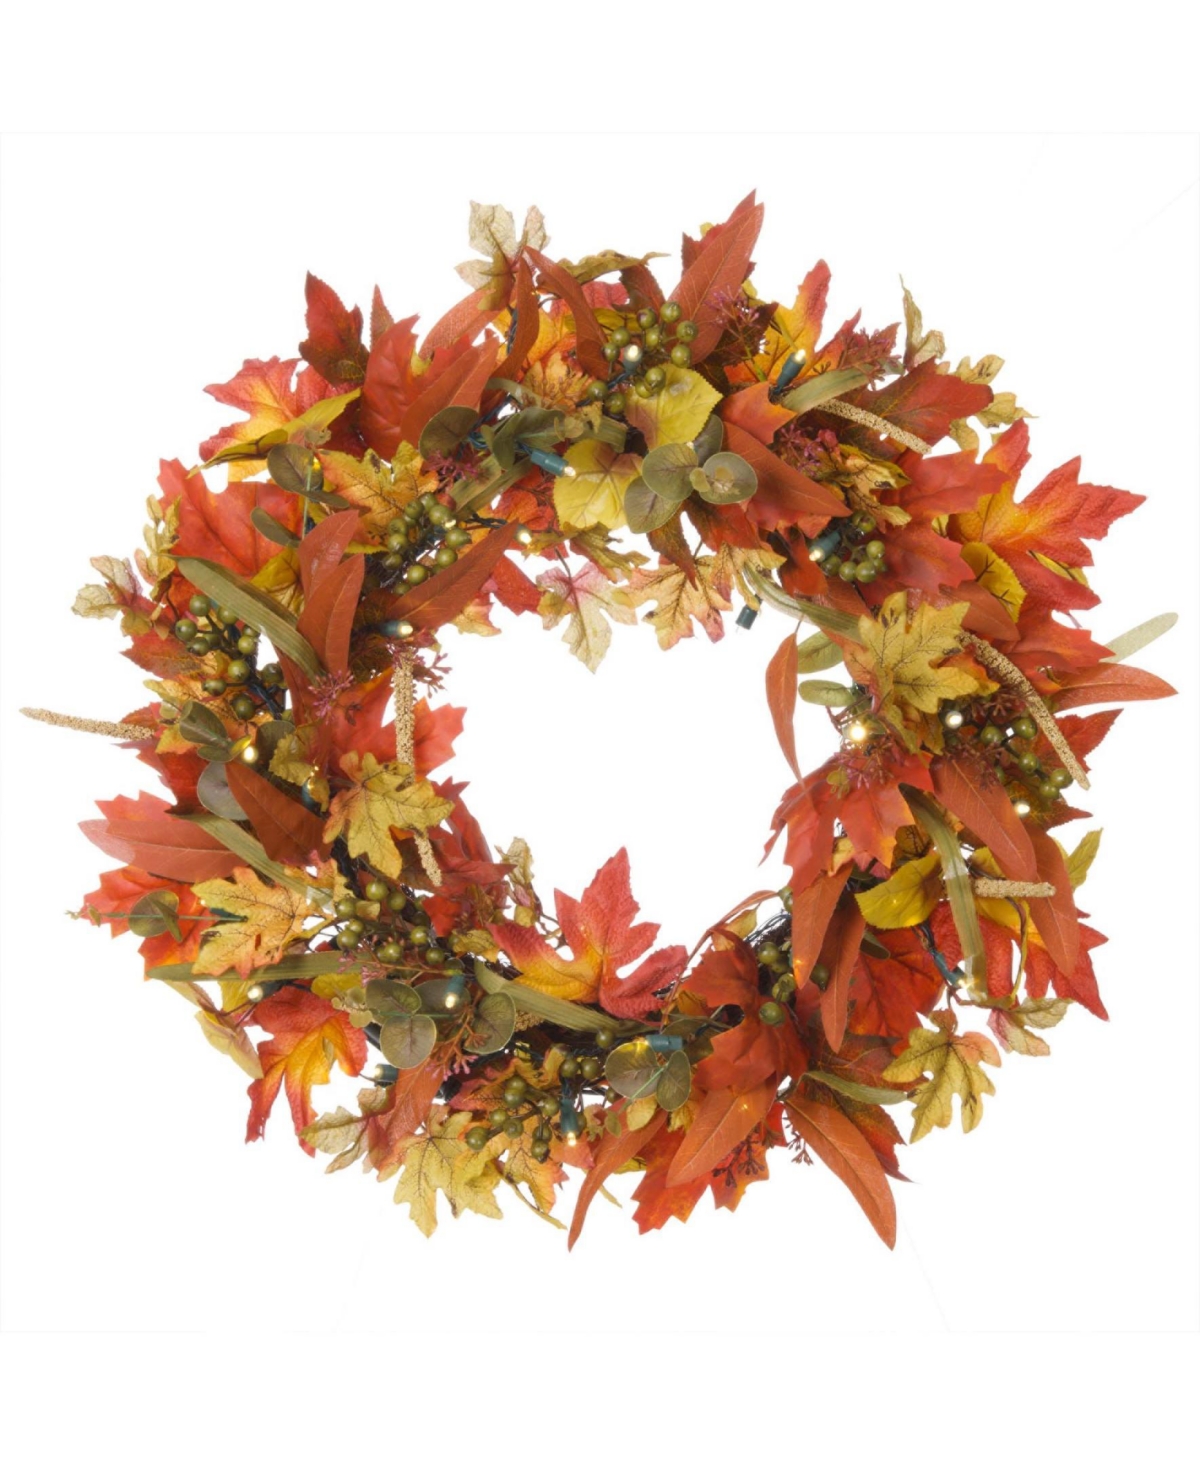 Company 24" Holiday Wreath with Lights, Fall Harvest Leaf - Assorted